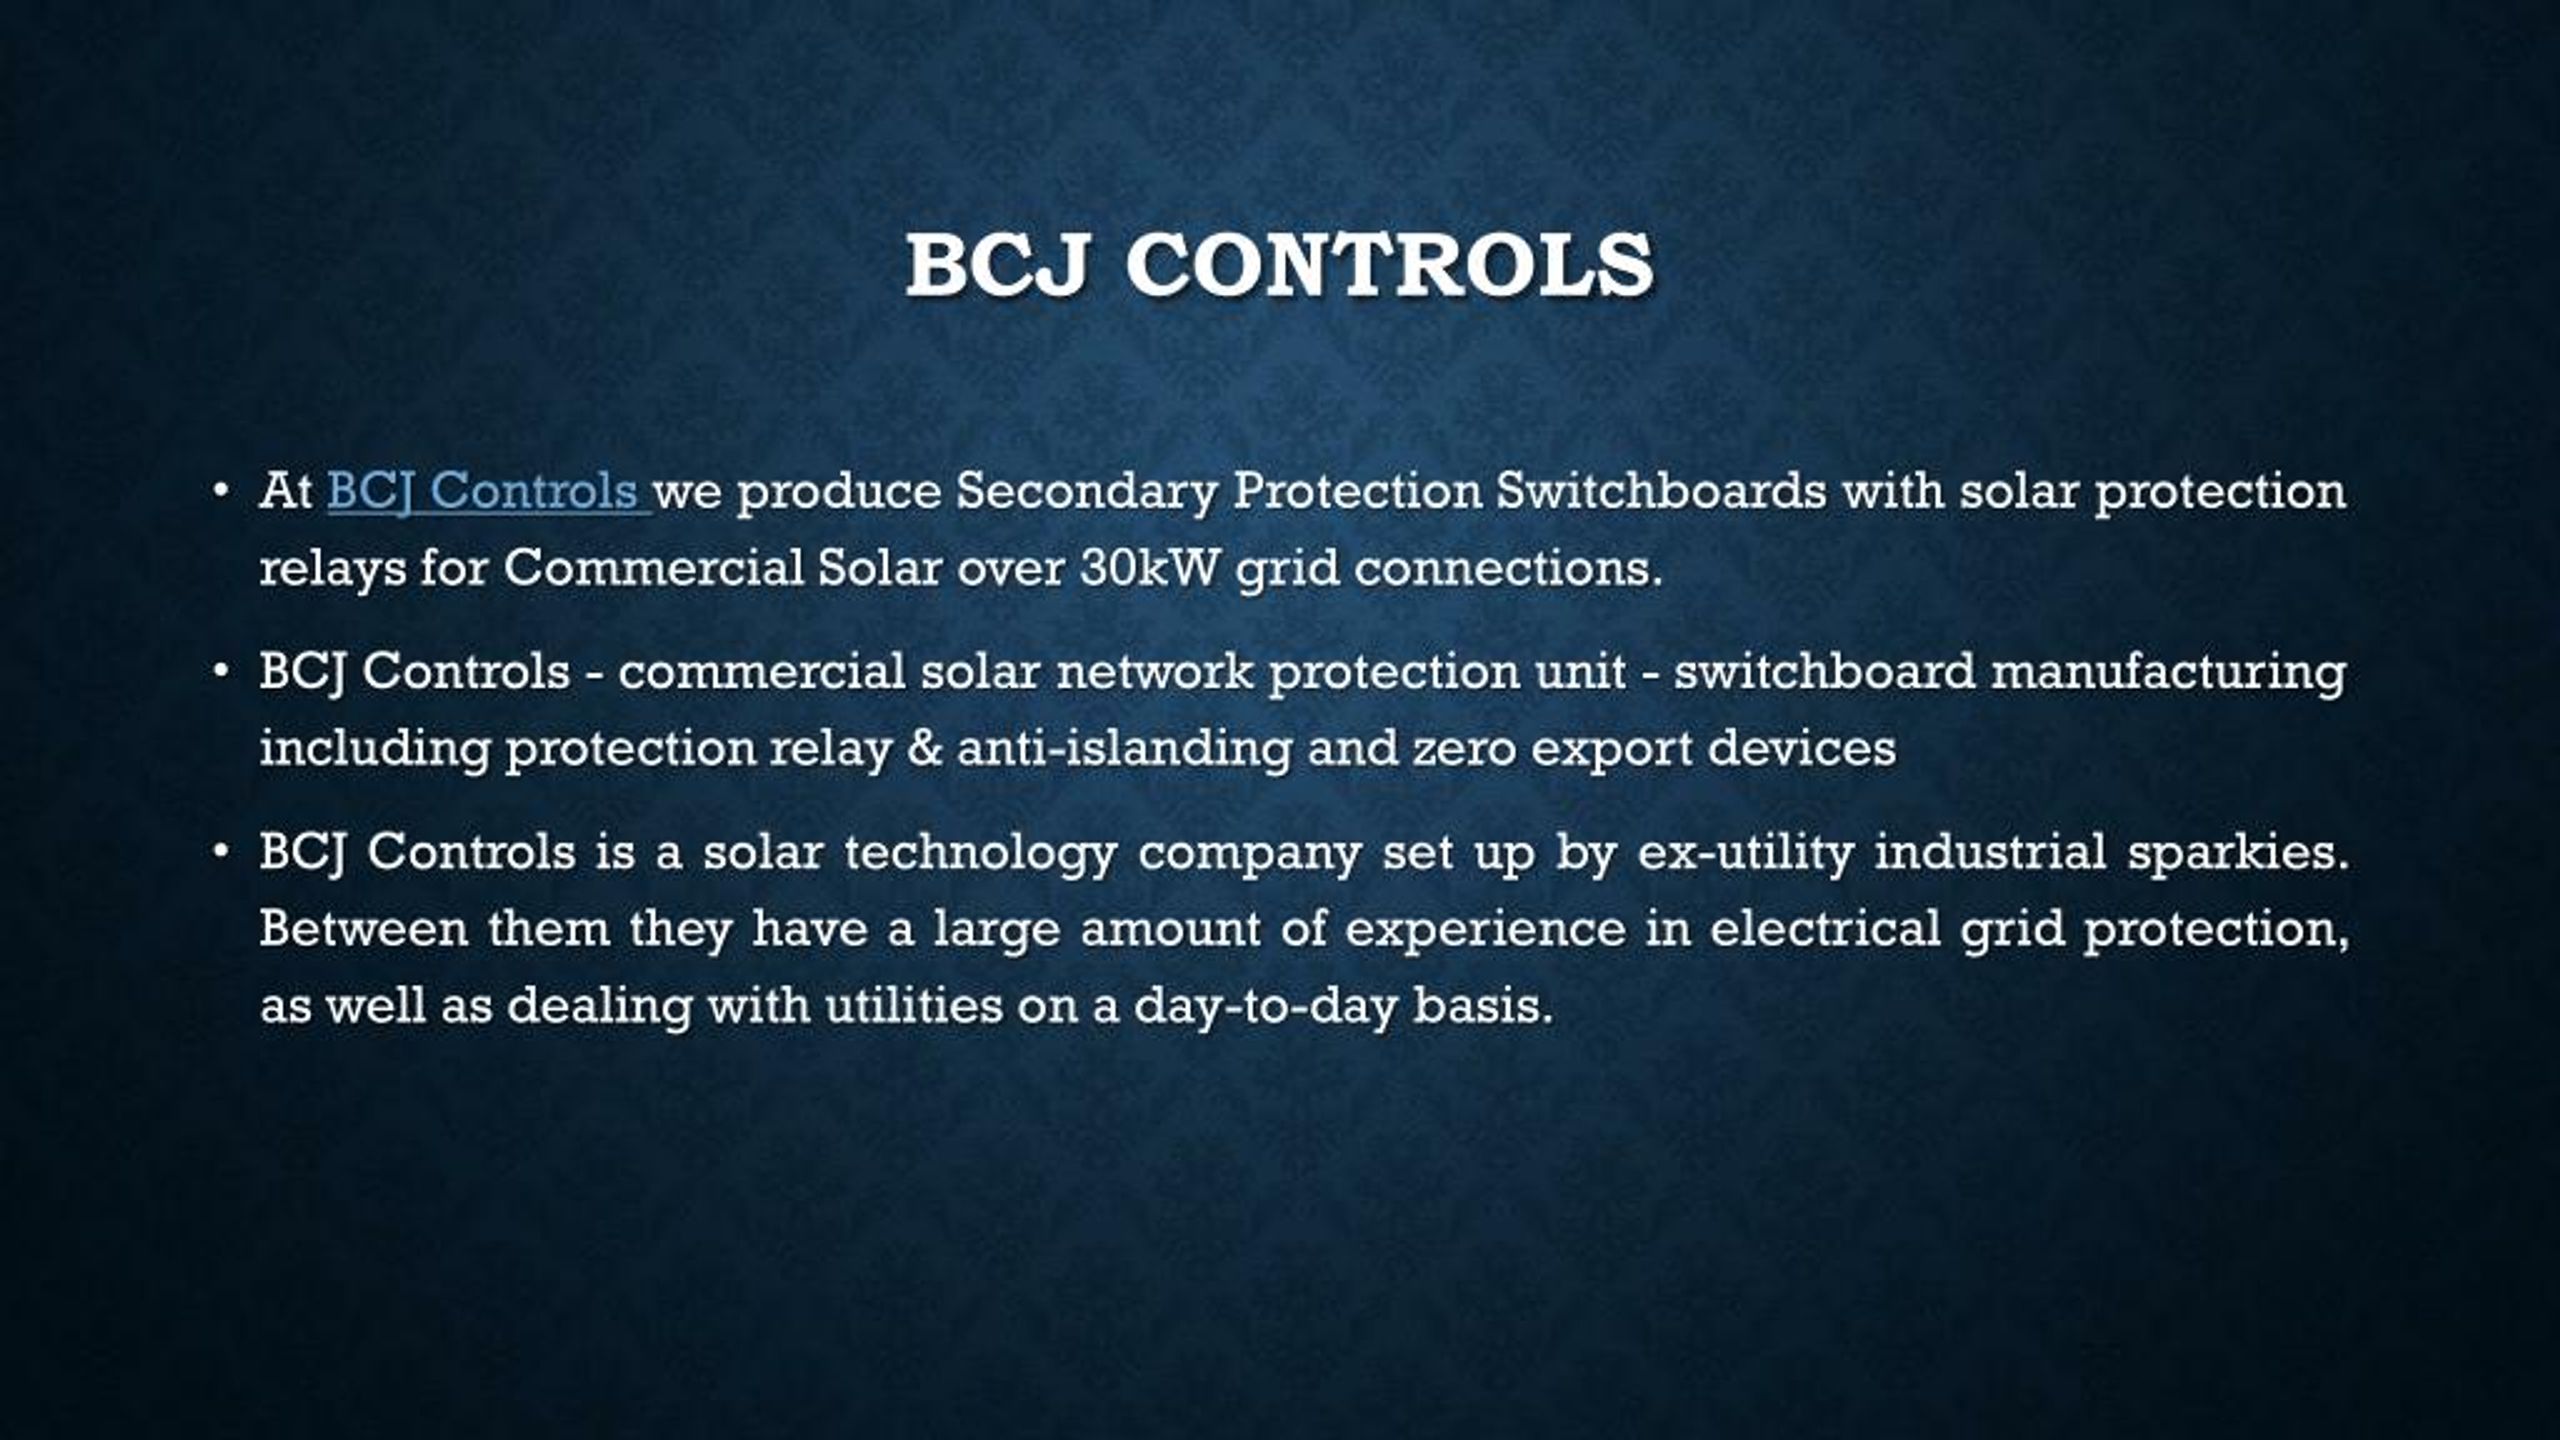 PPT - What is ComAp InteliPro? Solar Protection Relay